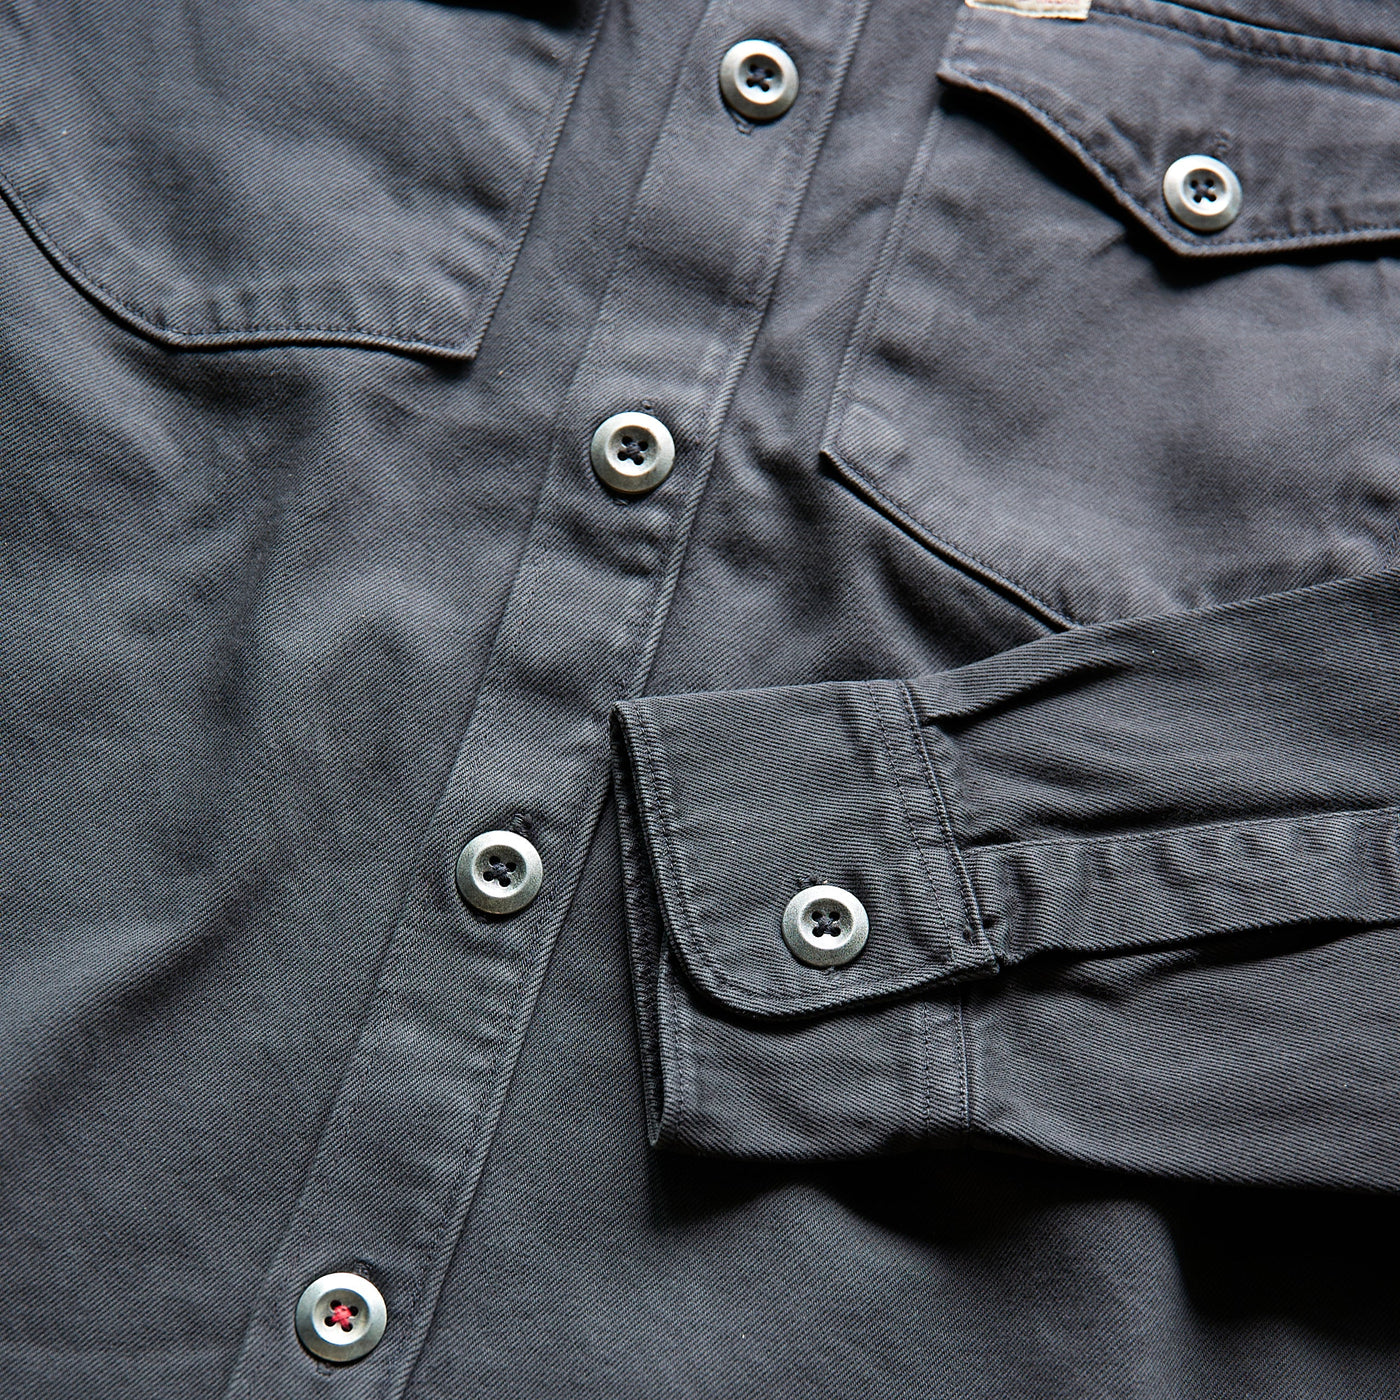 Iron & Resin - Mission Shirt - Charcoal